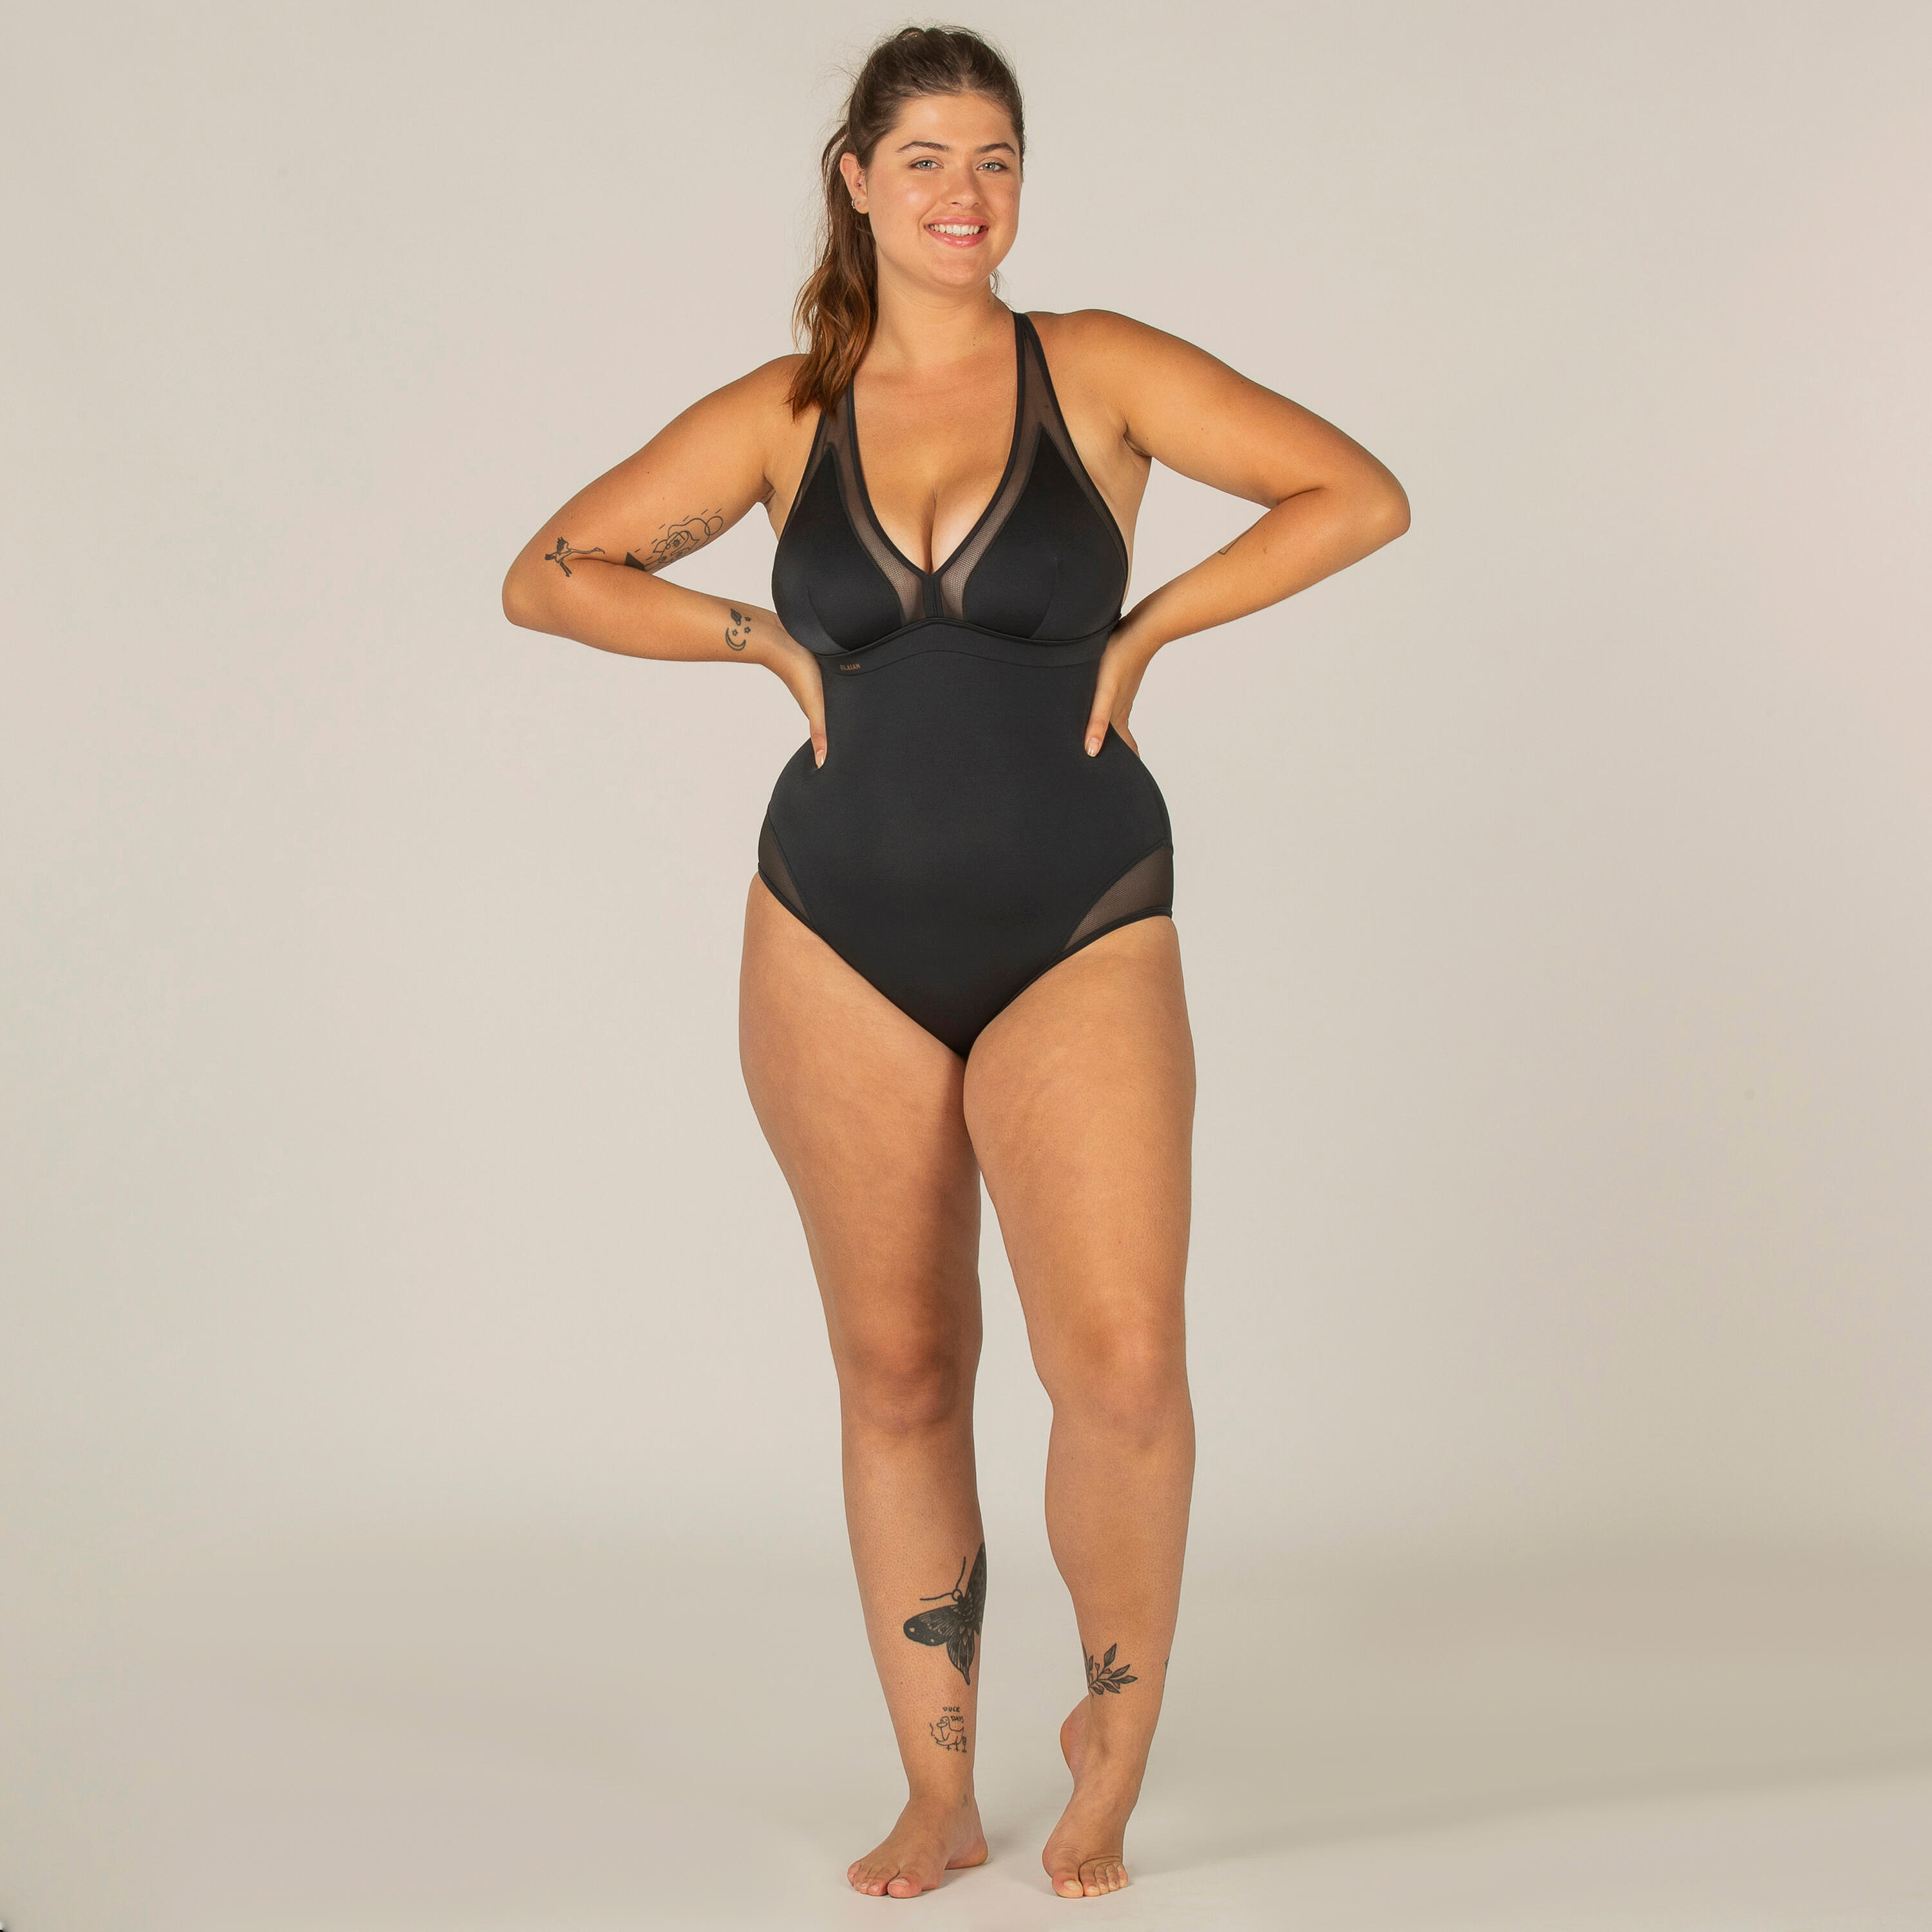 WOMEN'S SURFING SWIMSUIT WITH X BACK ISA 15/15